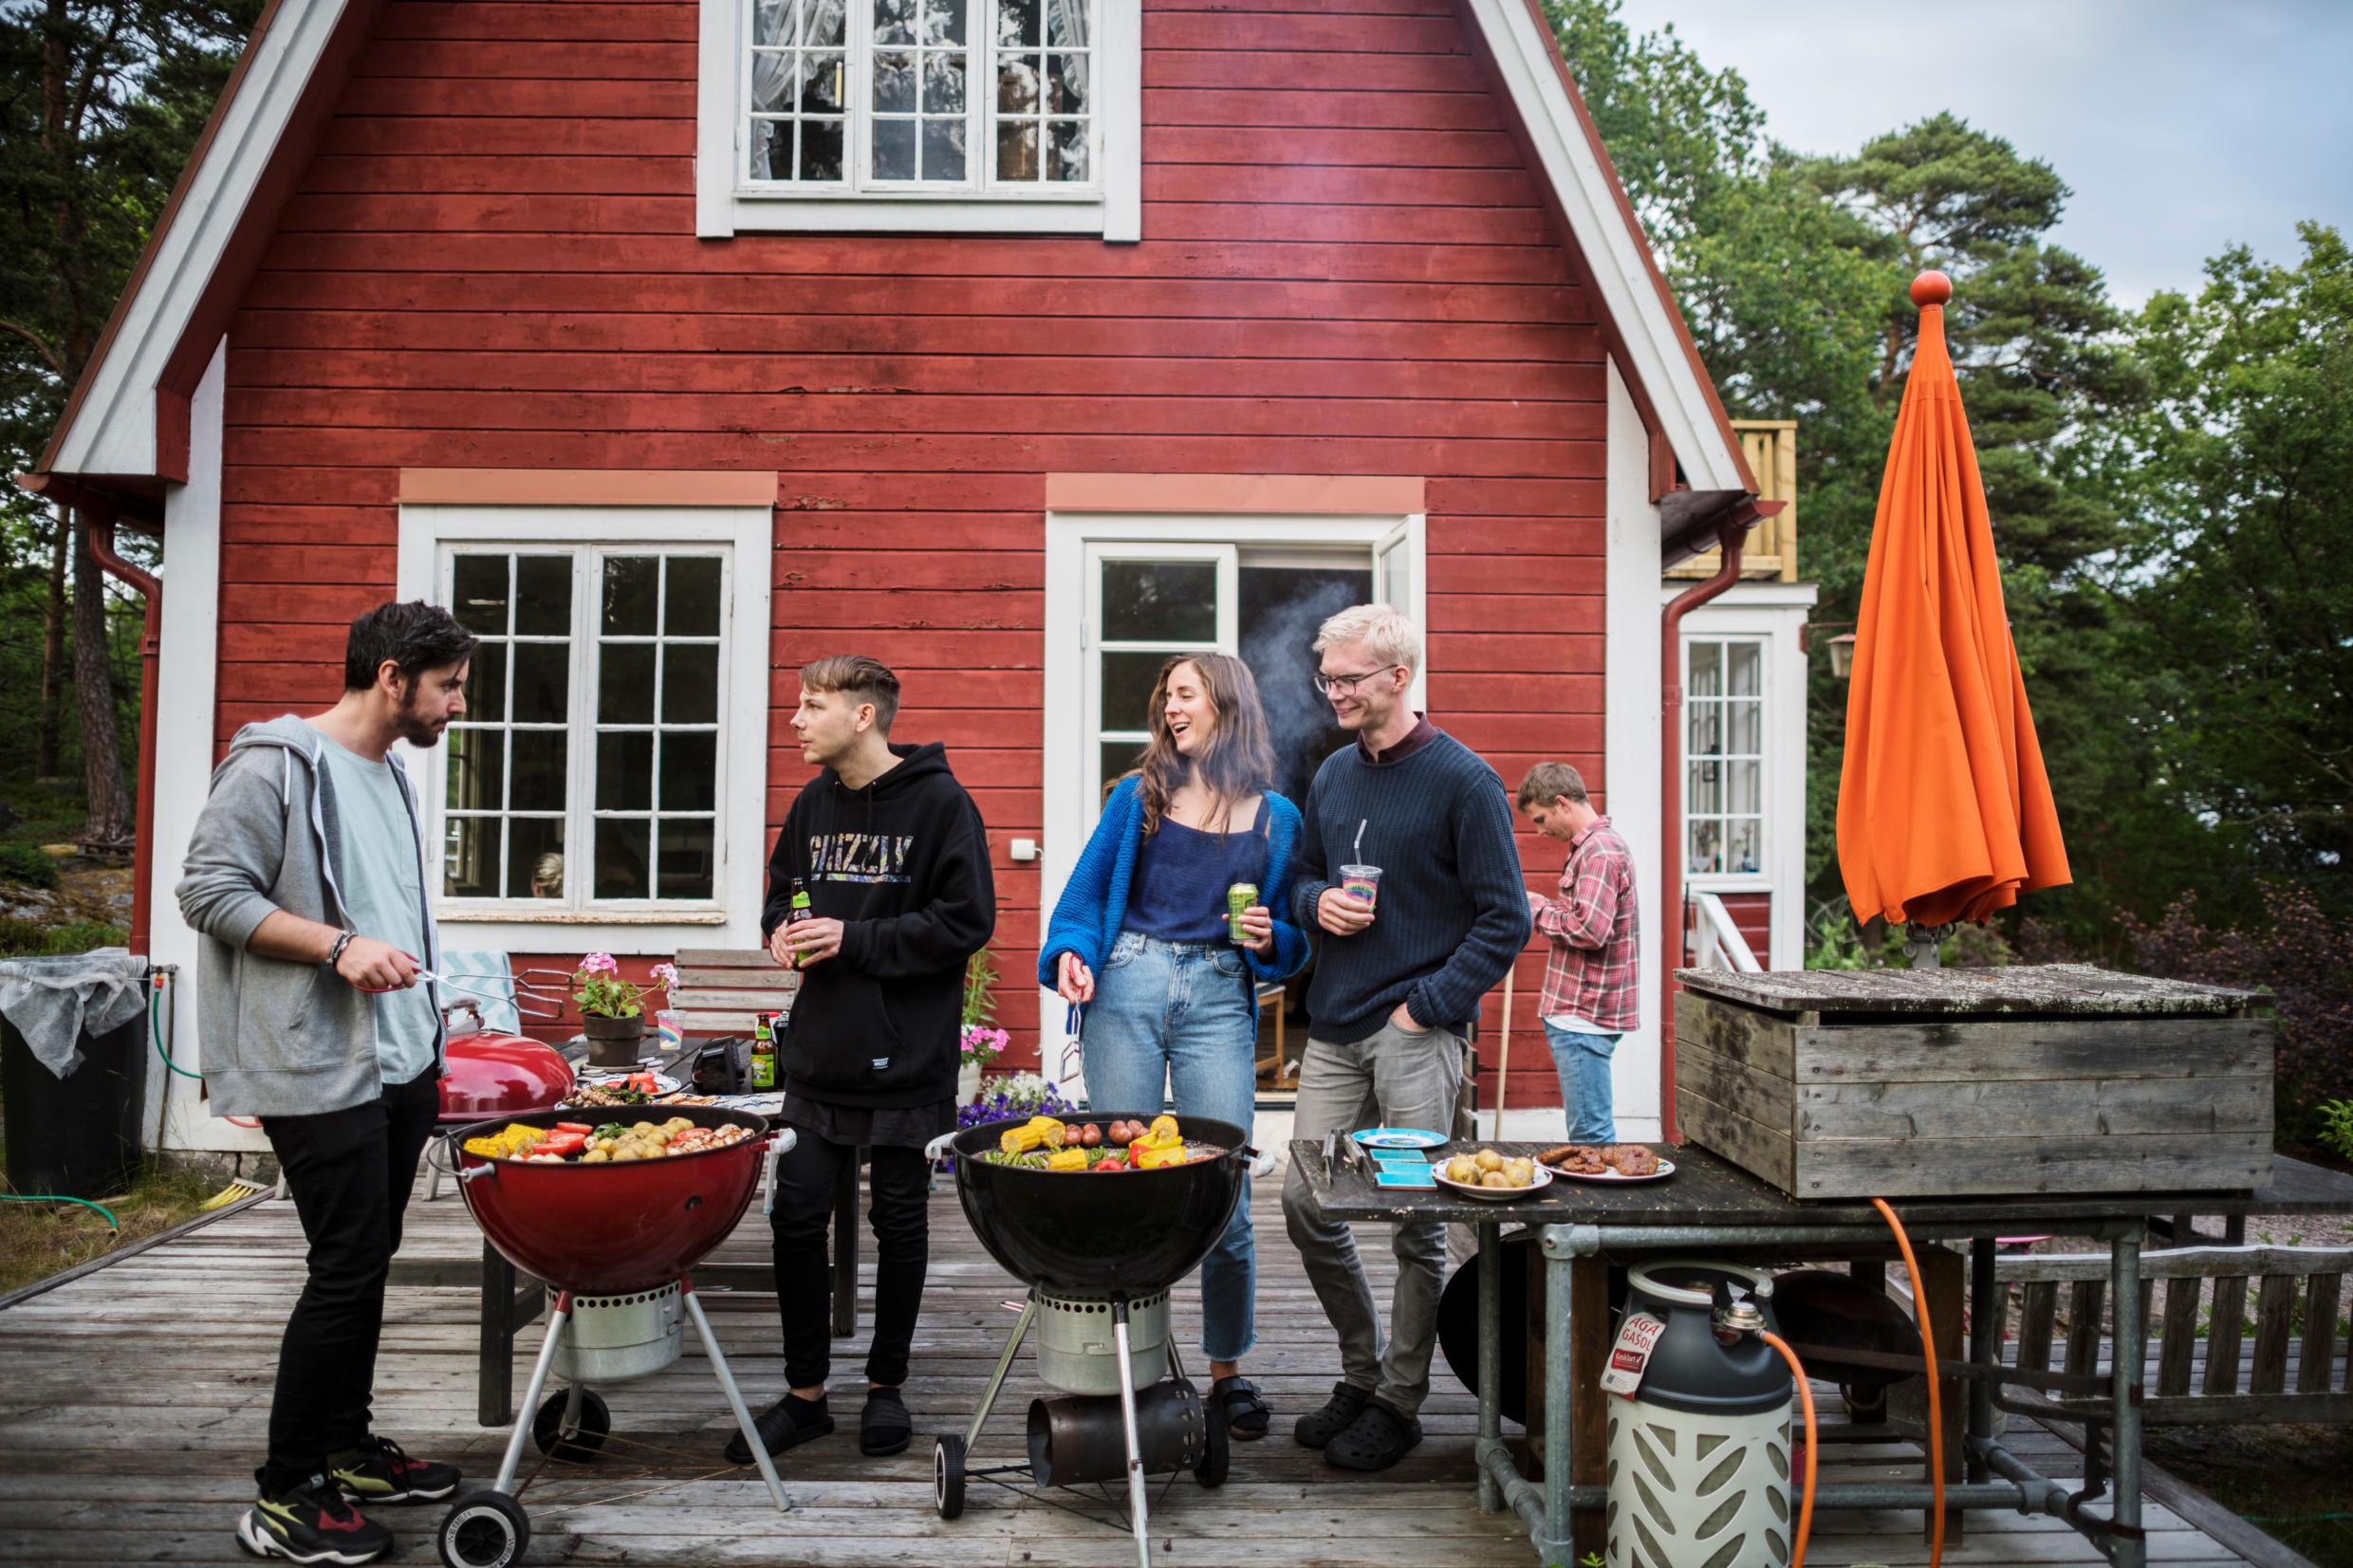 A group of people on a wooden deck are drinking and preparing food on two outdoor grills.